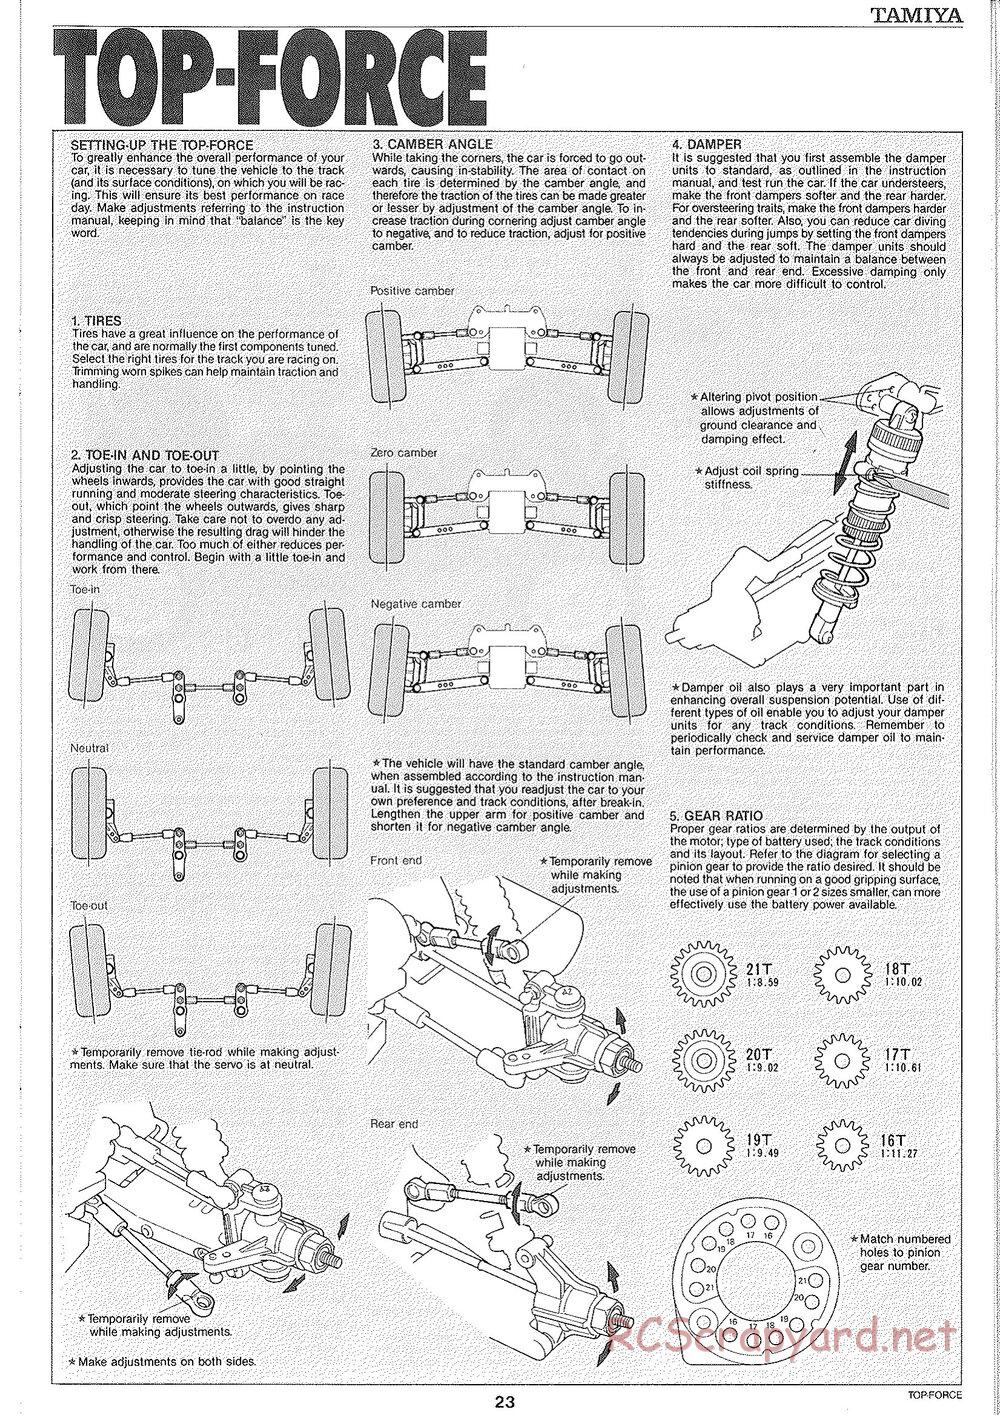 Tamiya - Top Force 2005 - DF-01 Chassis - Manual - Page 23